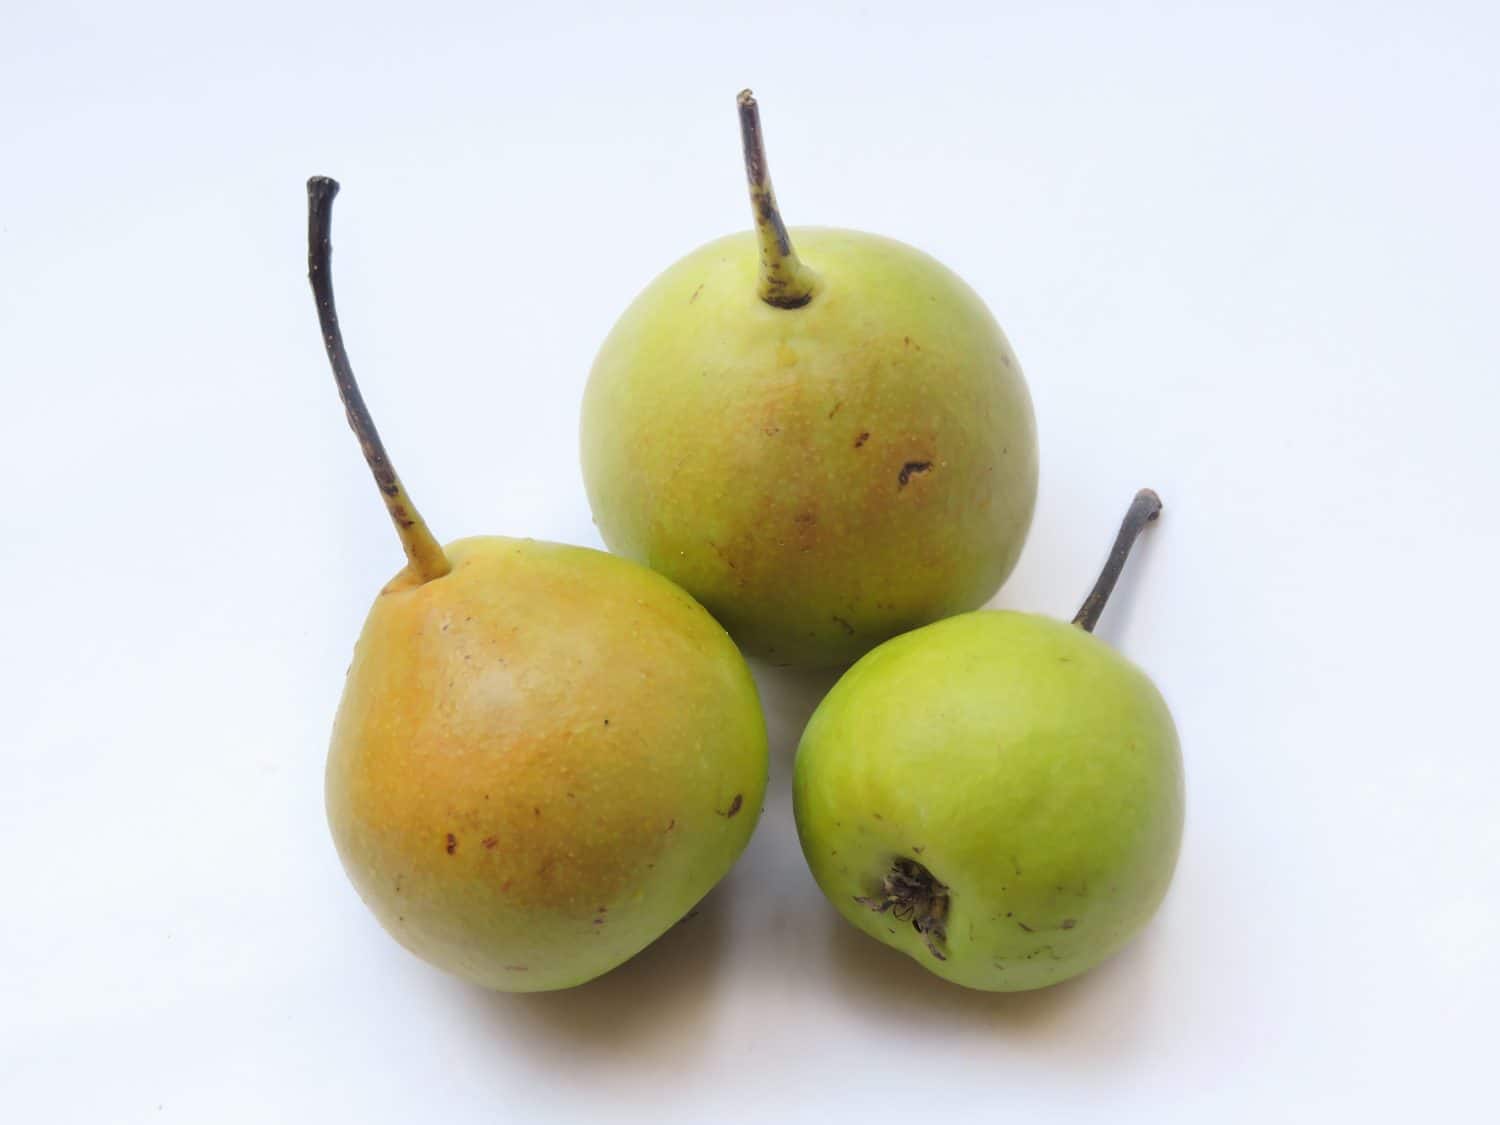 A variety of pear found in India called Nag phal or Babughosa in local language. It is sometimes called as Indian pear. It is sweet in taste and soft in appearance.